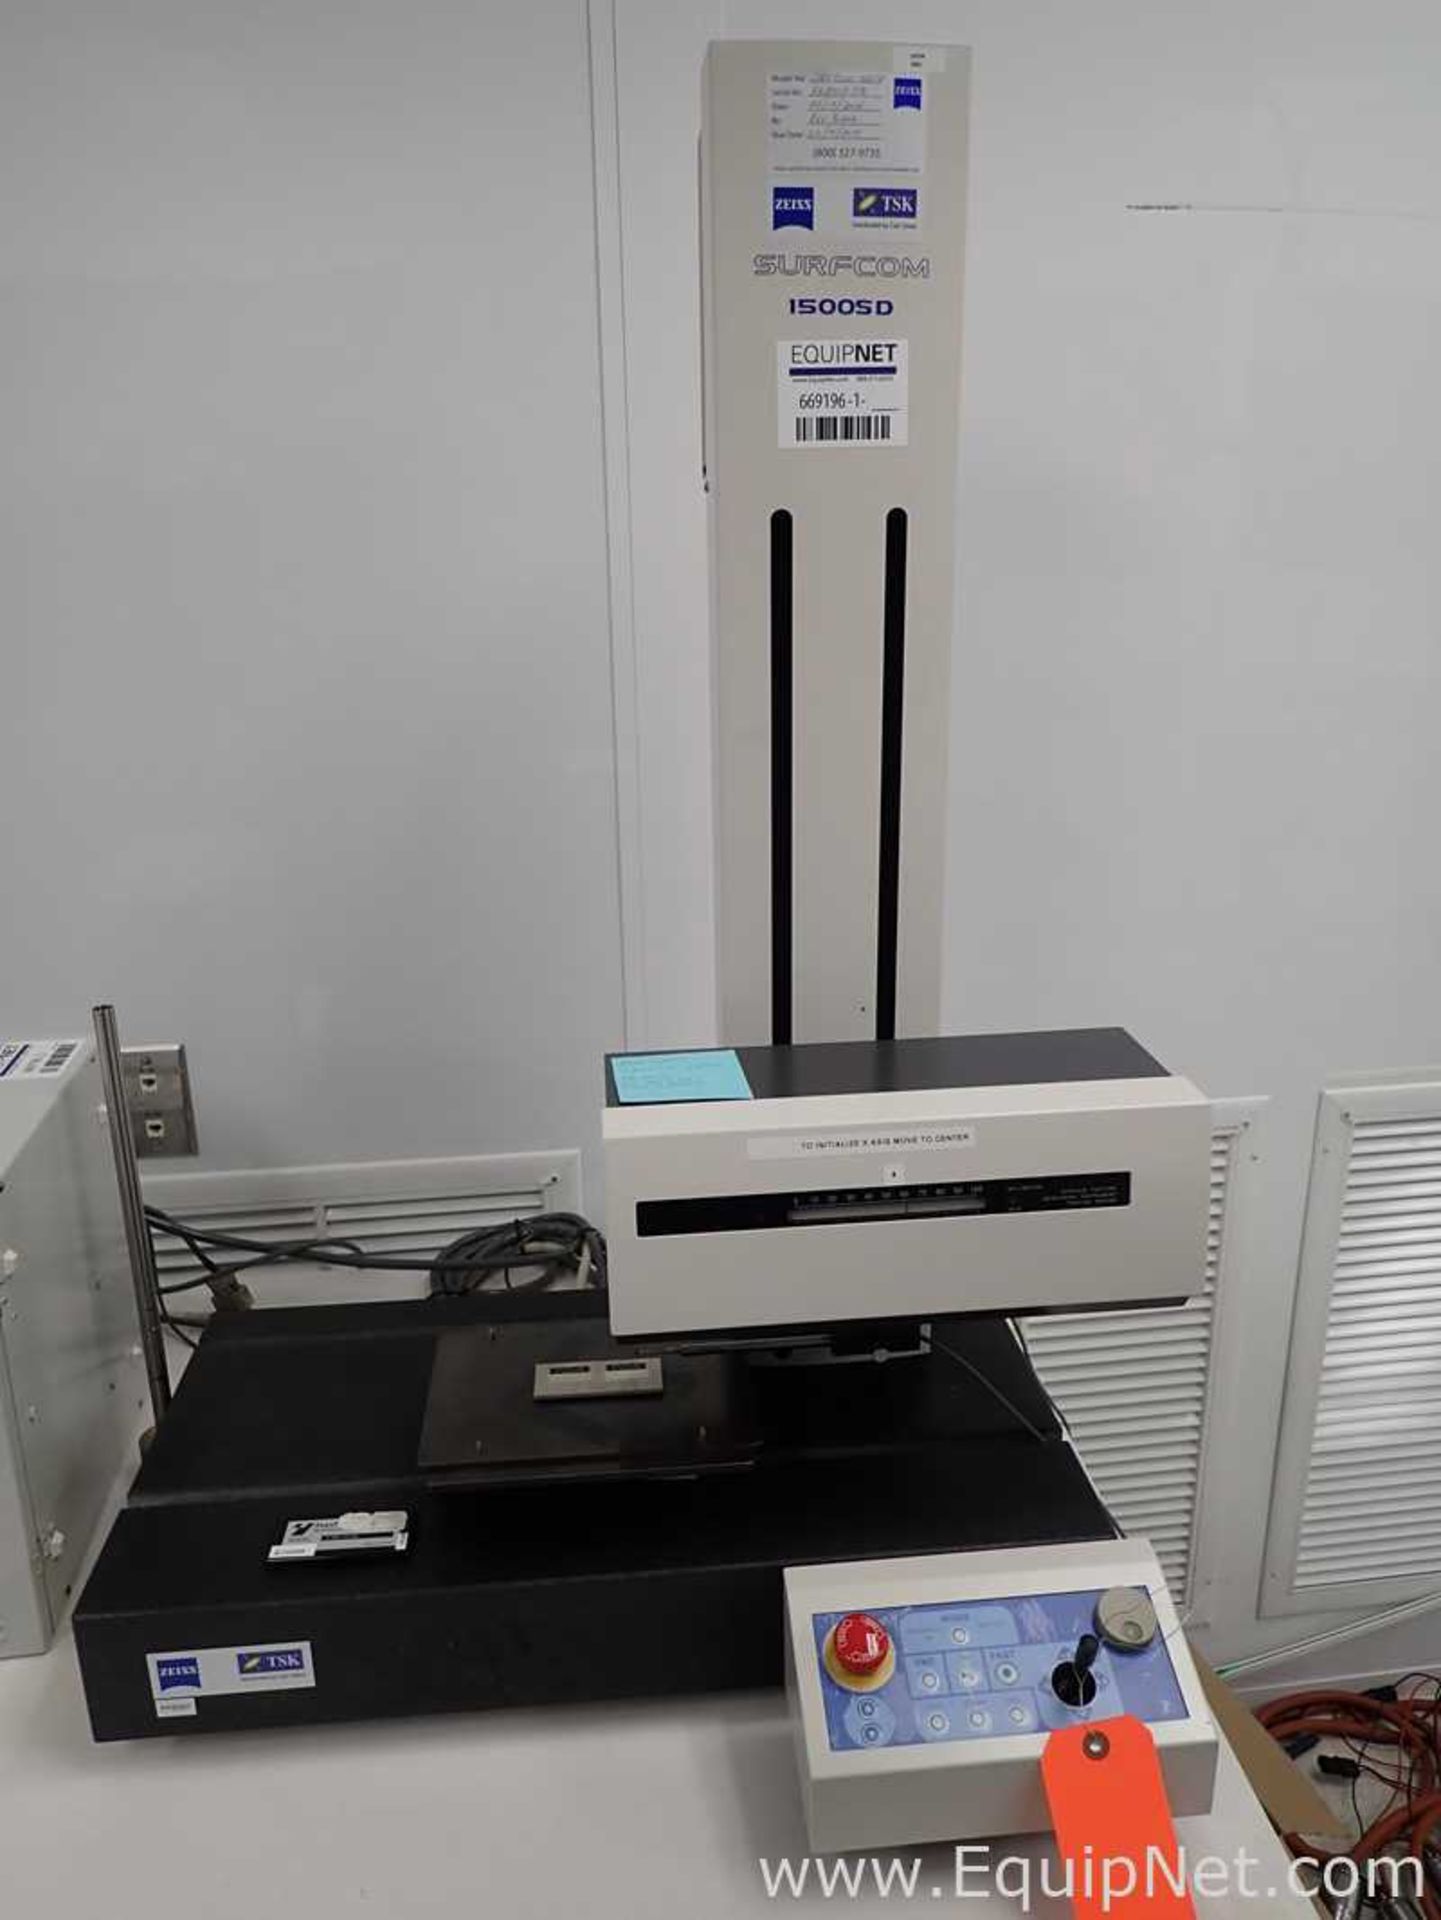 Zeiss Surfcom 1500SD Surface Profiler - Image 2 of 12